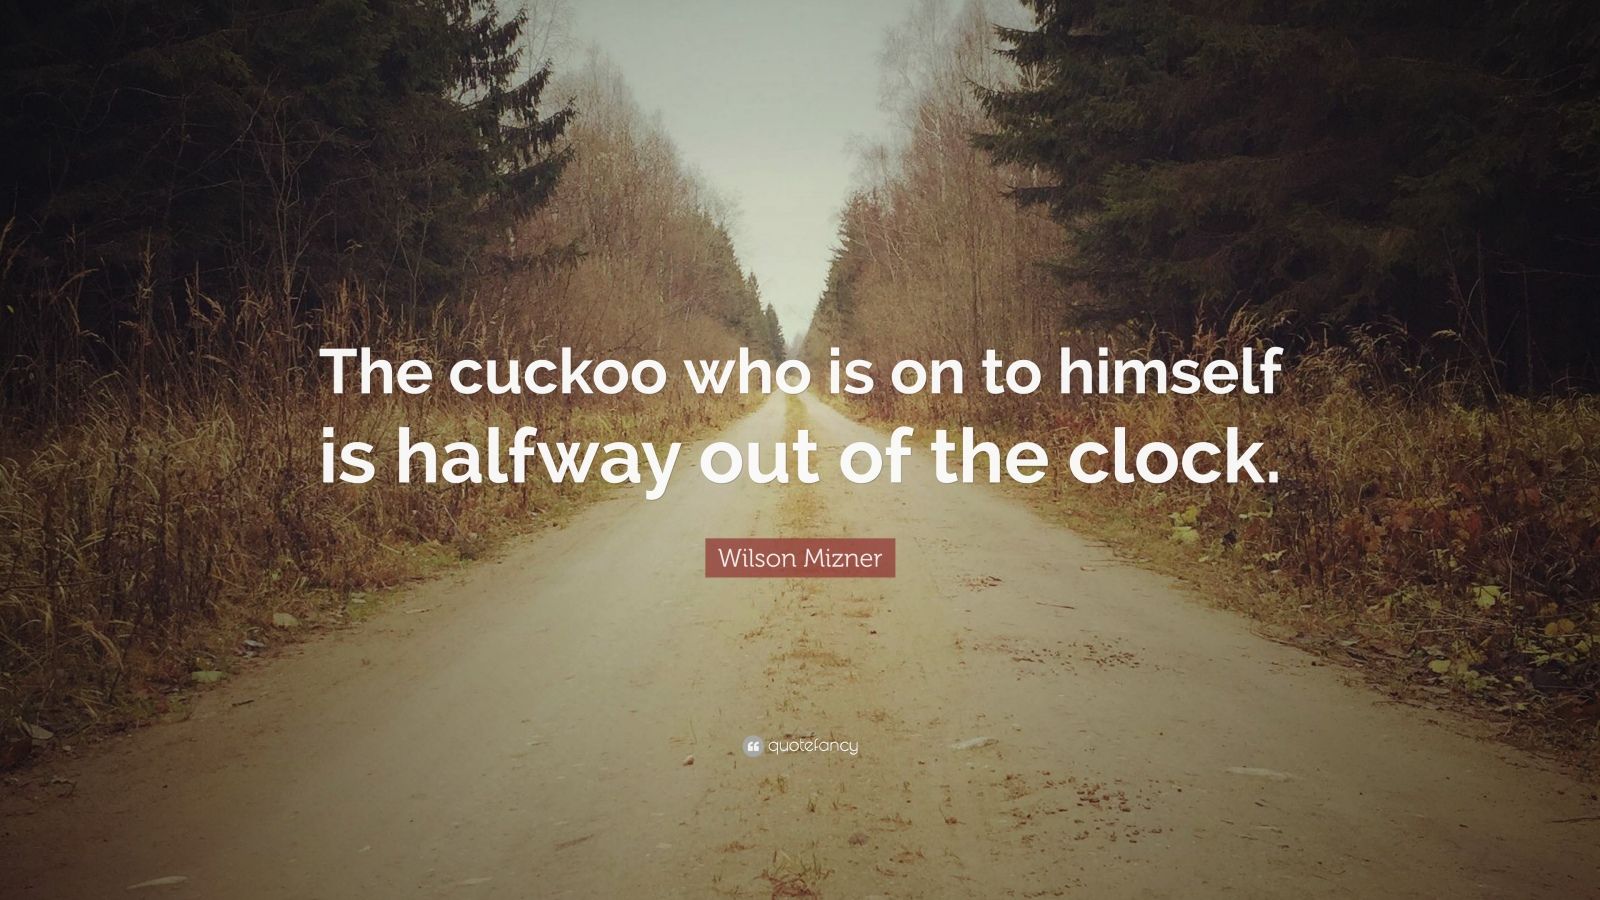 1026883-Wilson-Mizner-Quote-The-cuckoo-who-is-on-to-himself-is-halfway-out.jpg